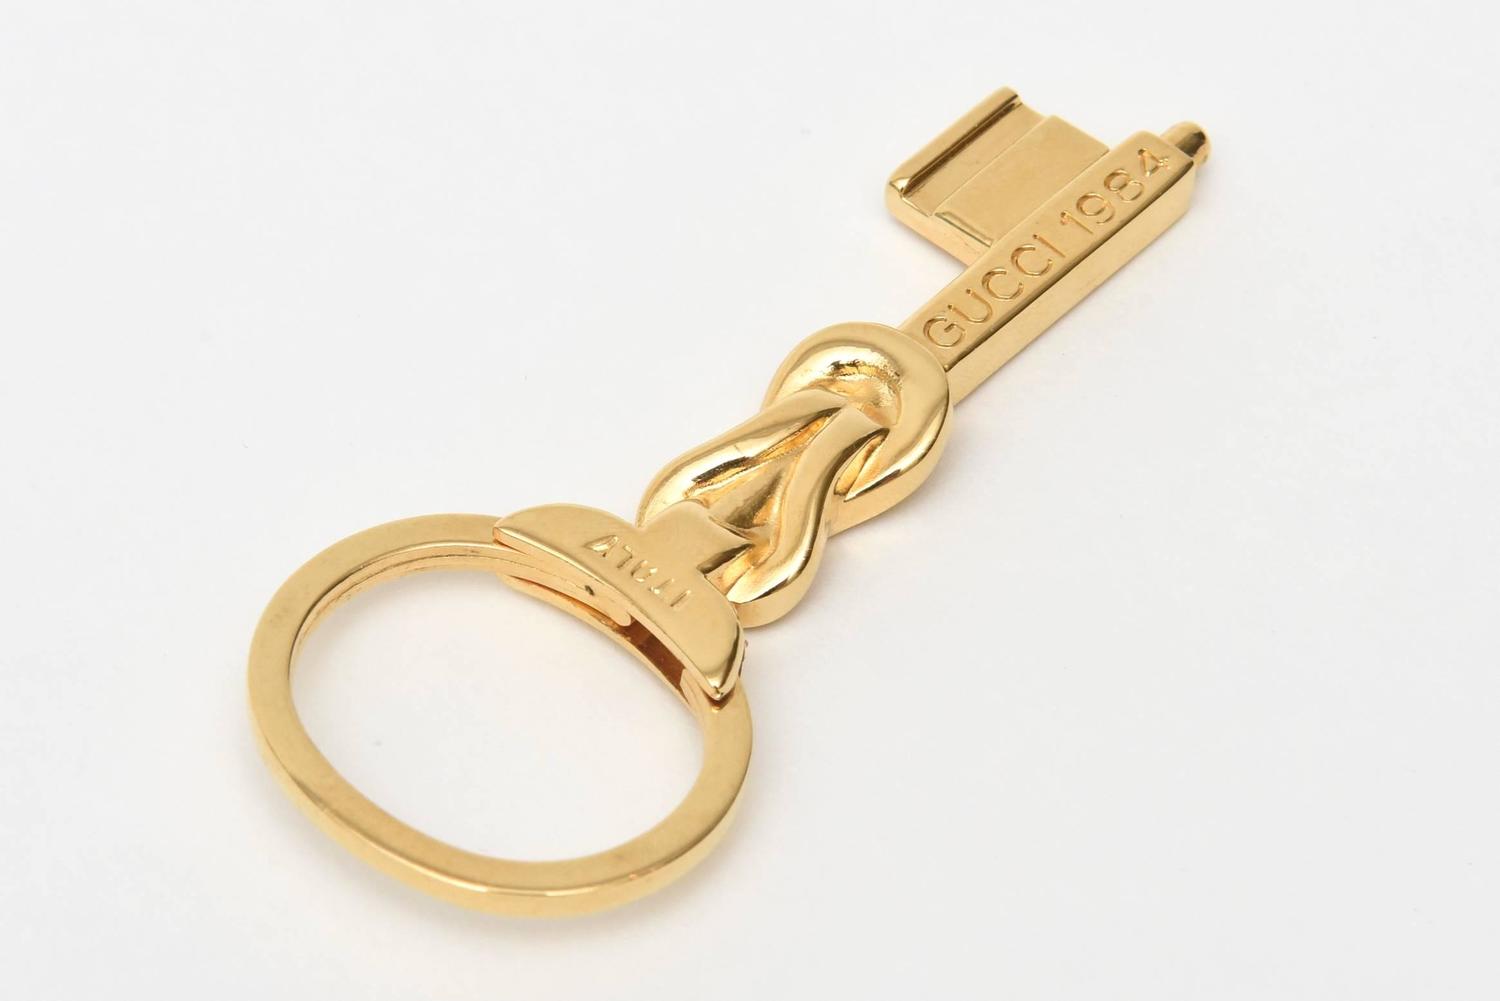 Signed Gucci Gold Plated Key Chain For Sale at 1stdibs